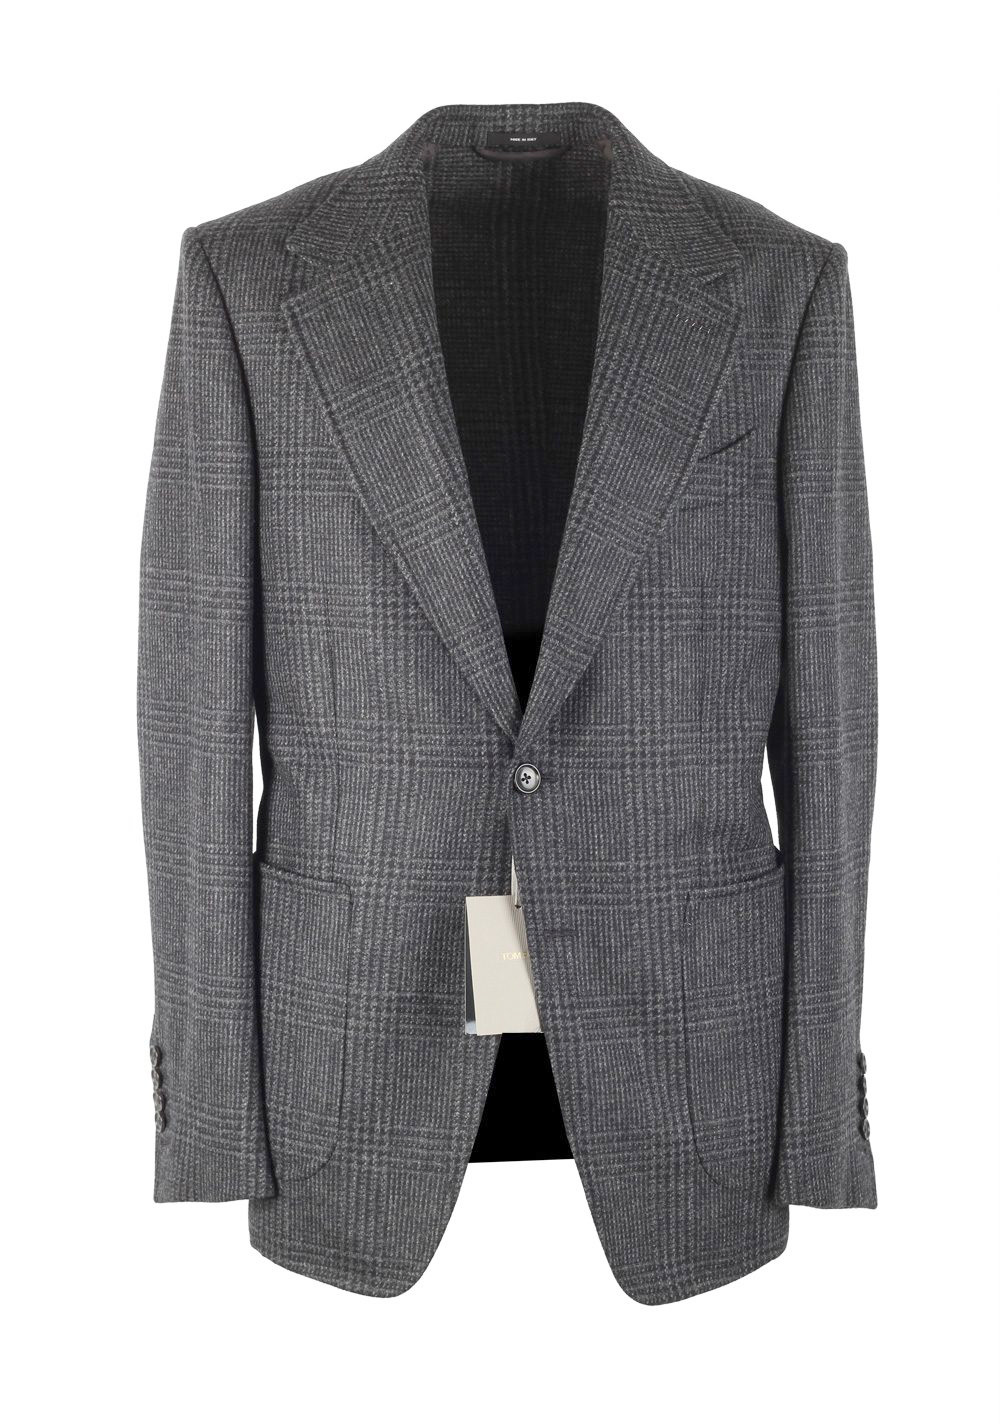 TOM FORD Shelton Checked Gray Sport Coat Size 54 / 44R U.S. | Costume Limité